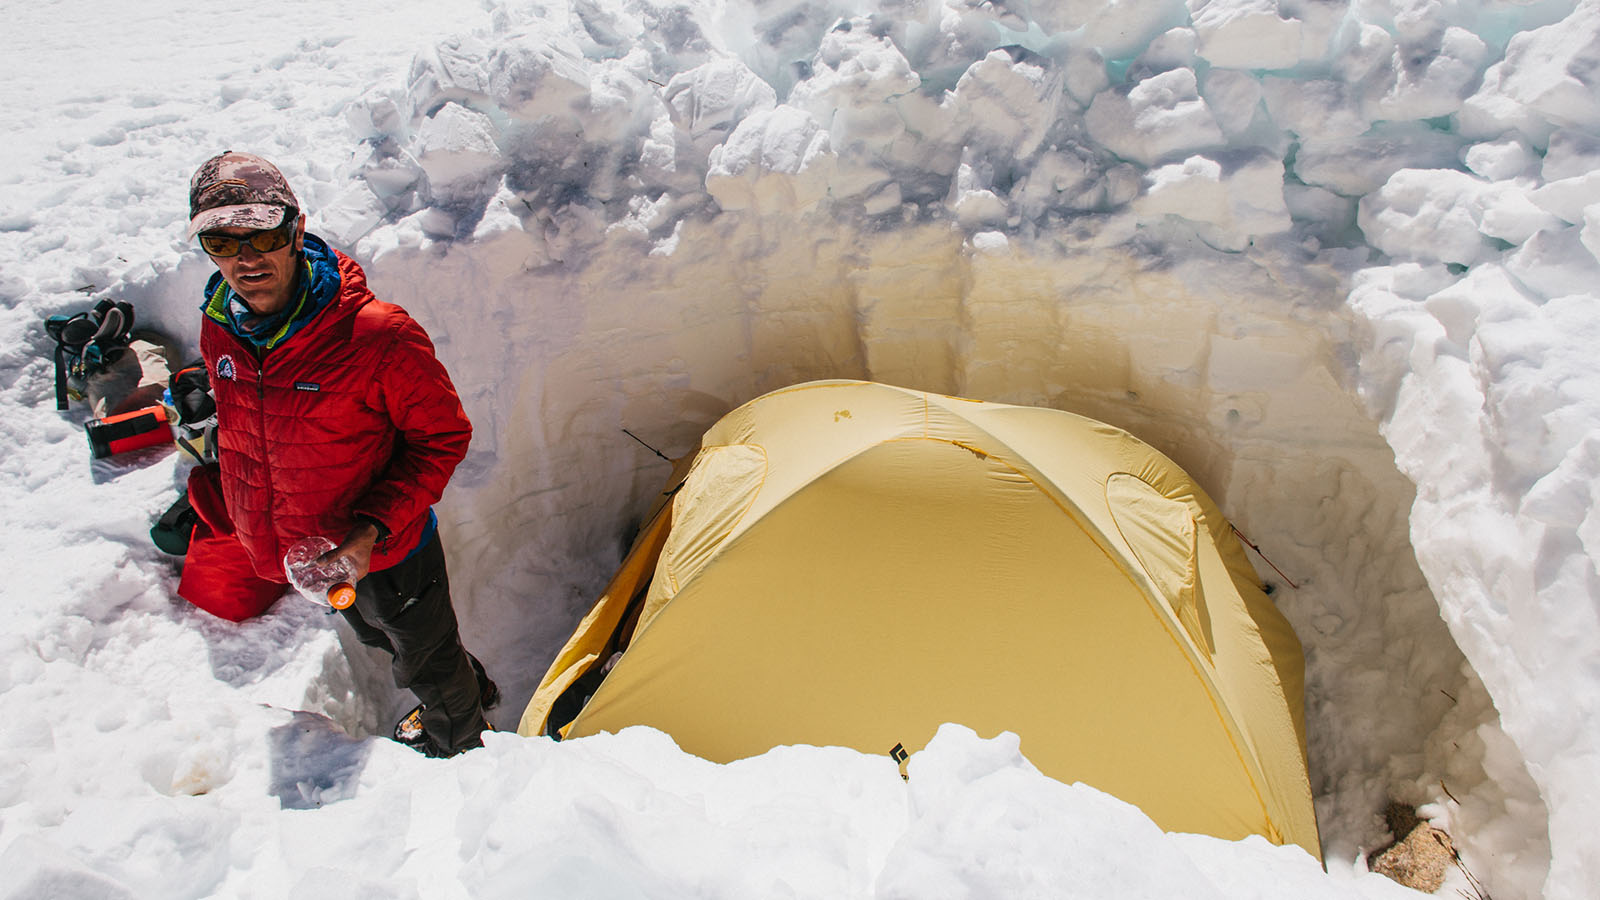 How To Build A Snow Shelter